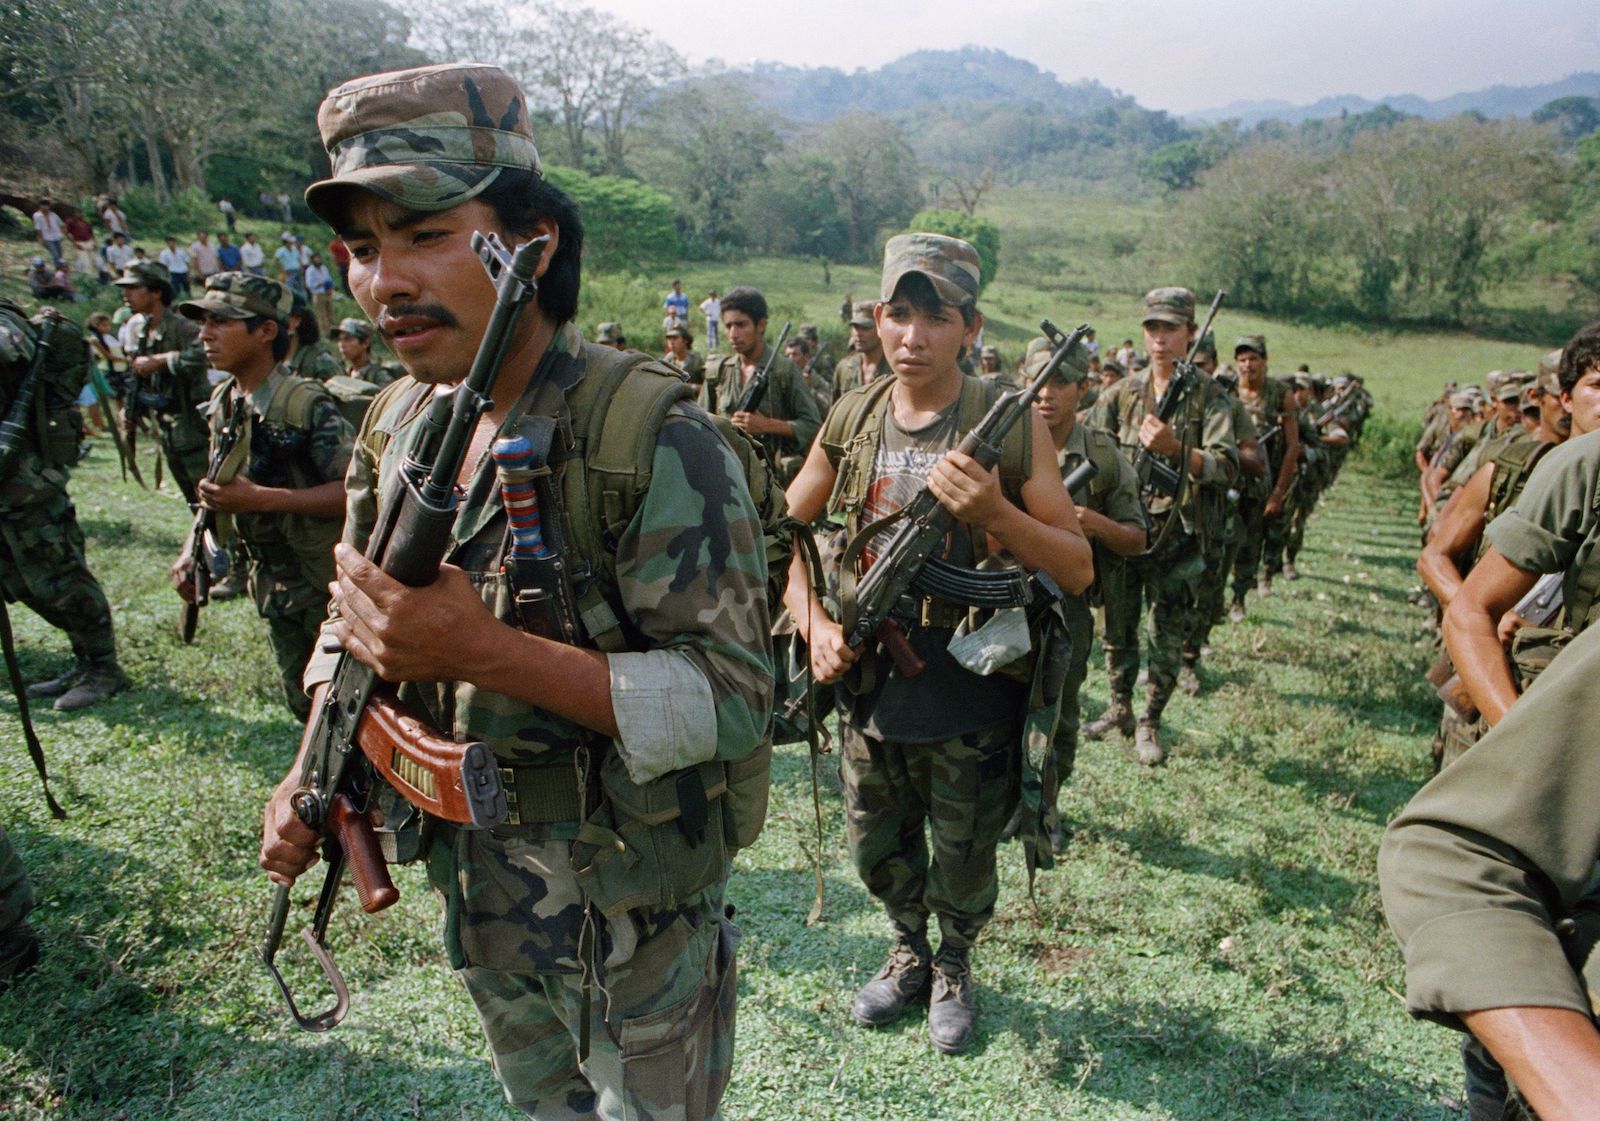 Nicaraguan Contra soldiers marching